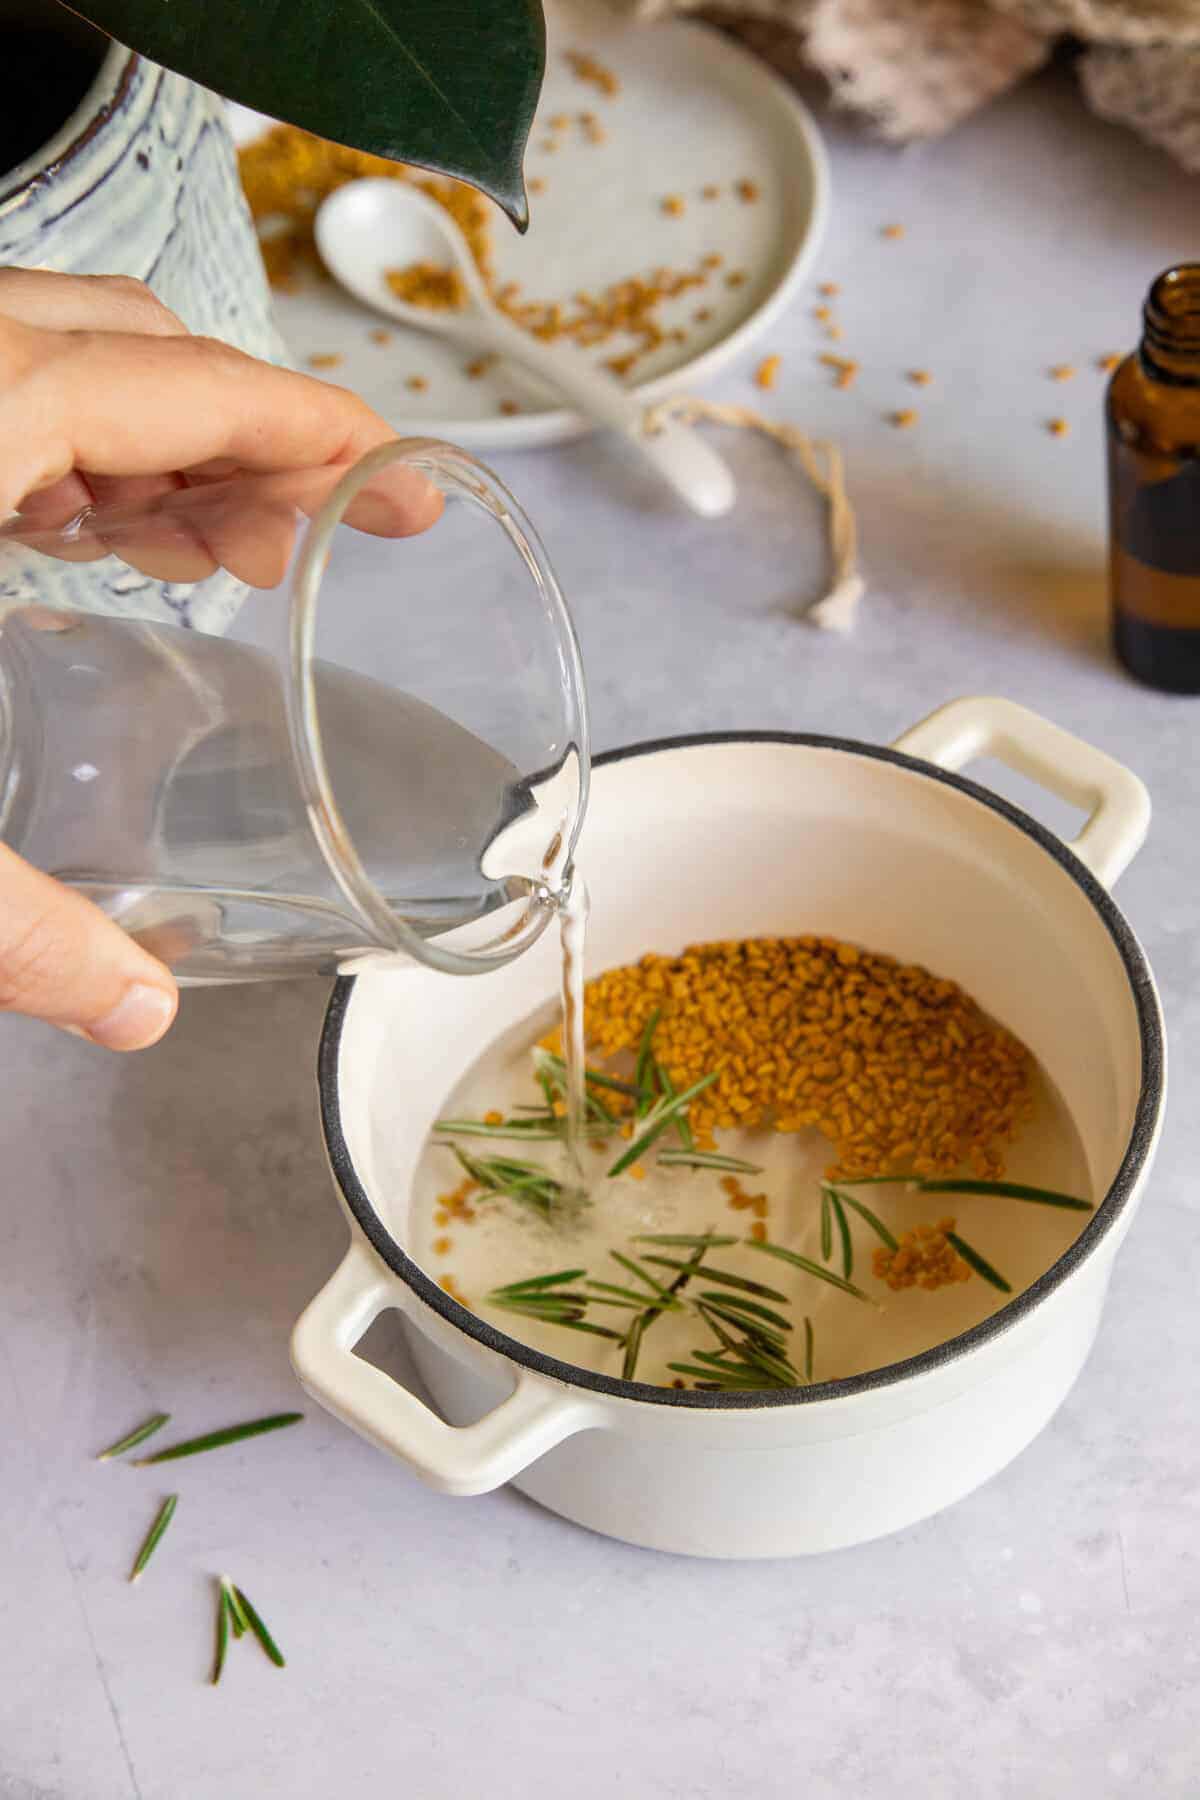 Combine fenugreek and rosemary with water to make scalp serum infusion